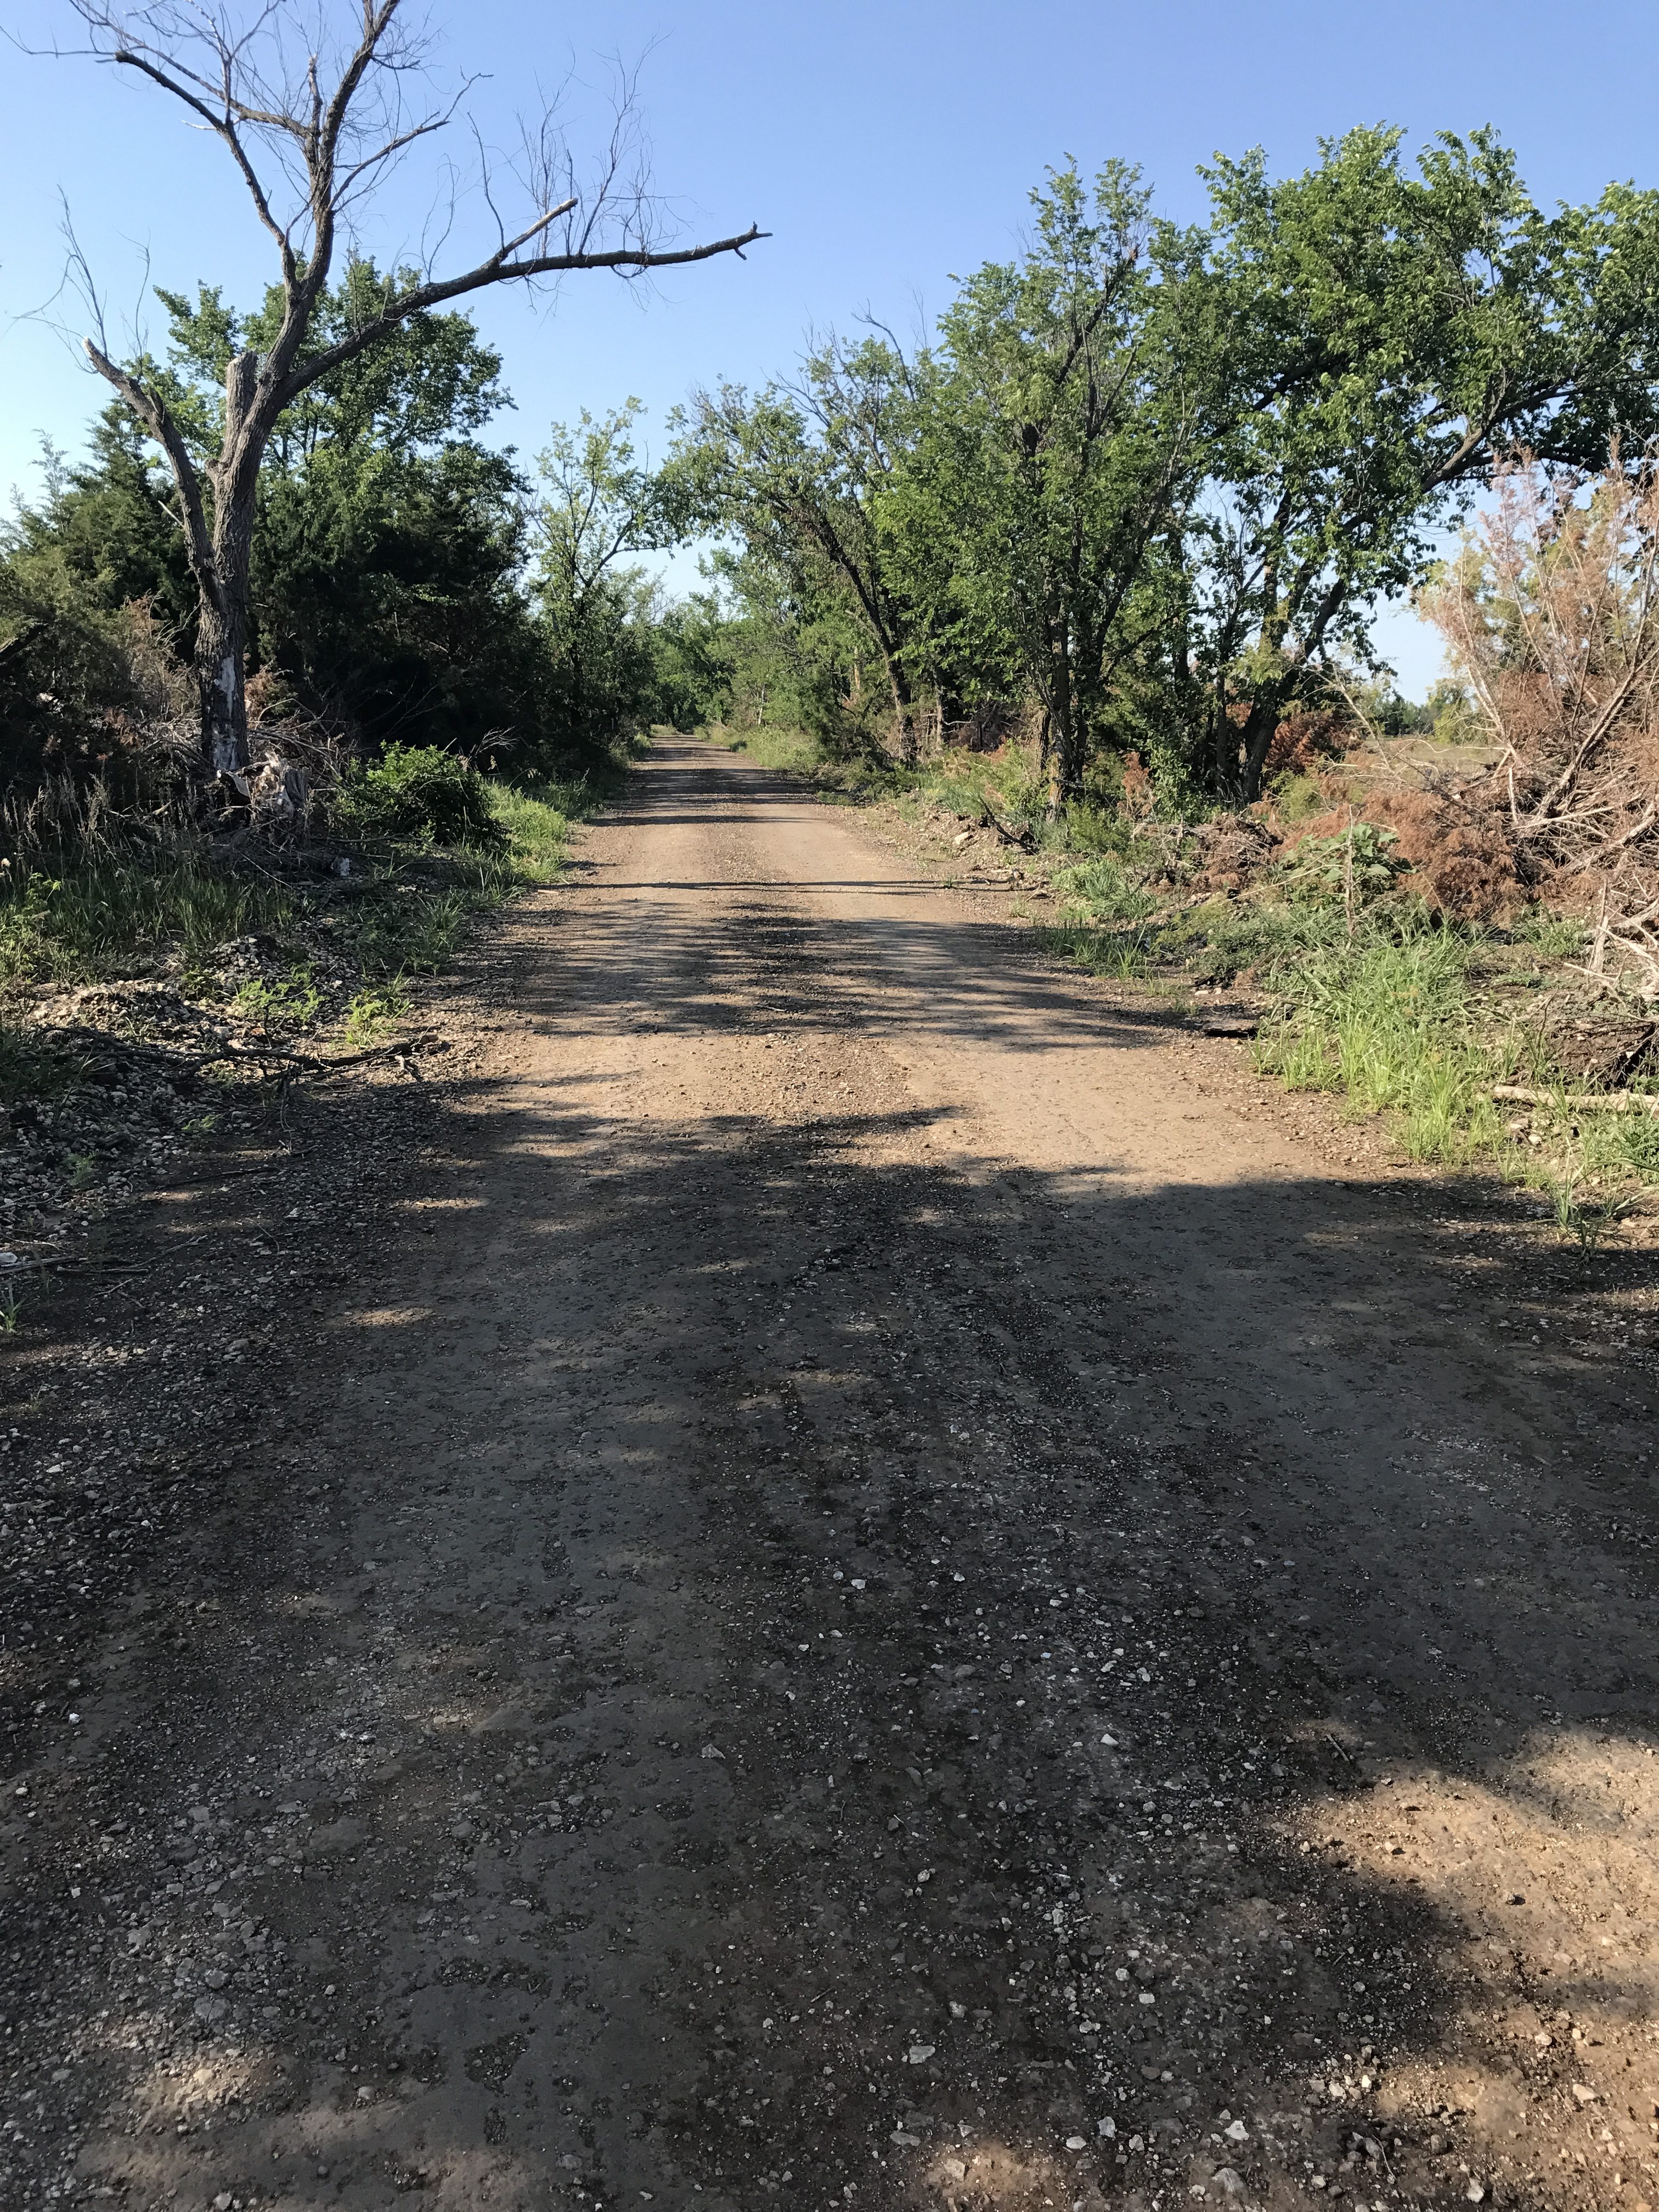 Take the Dirt Road: 5 Reasons Why